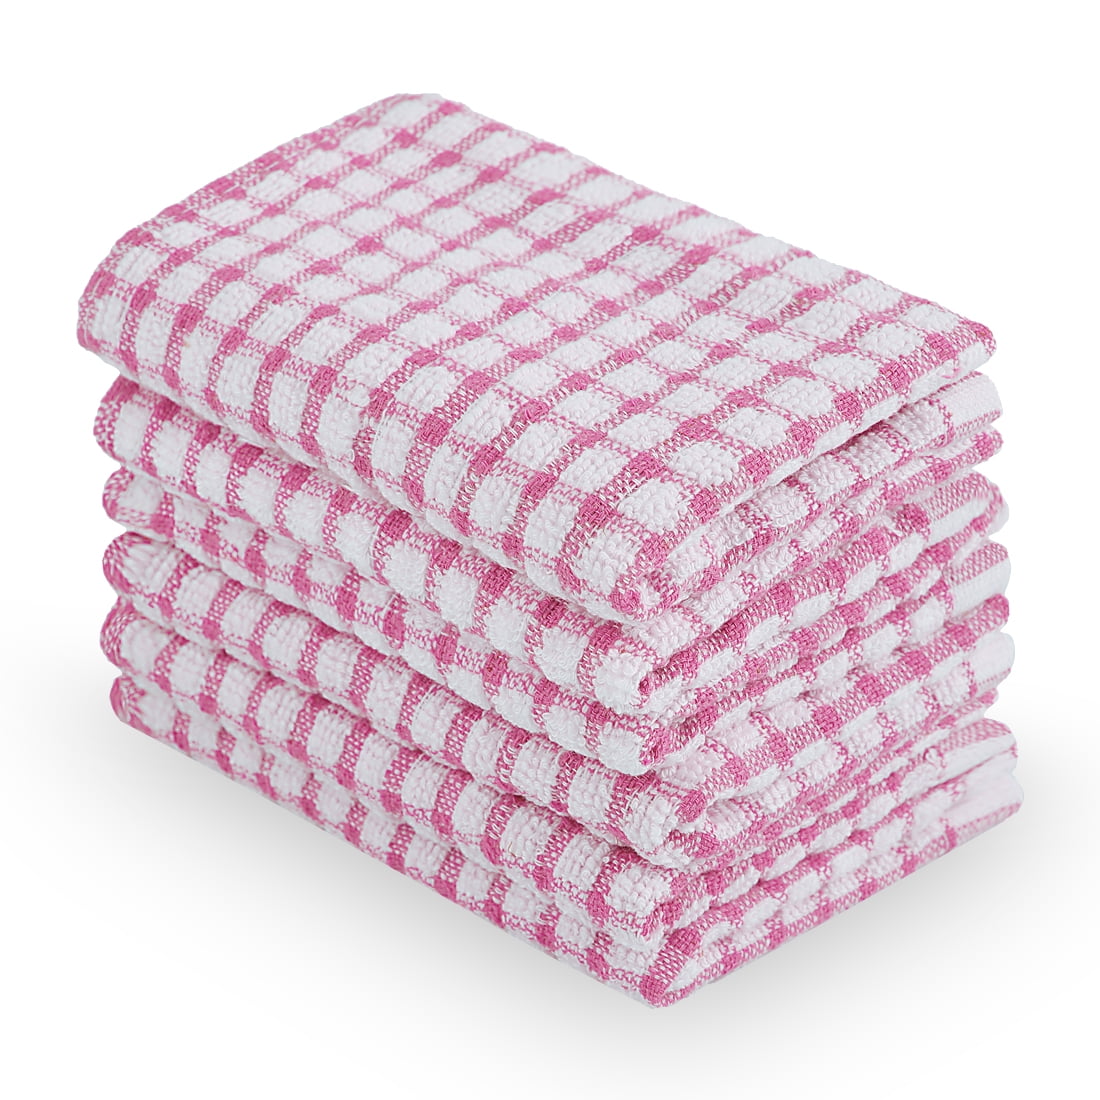 100% Cotton Kitchen Terry Tea Towels Dark Pink and White Checked Pack of 6 